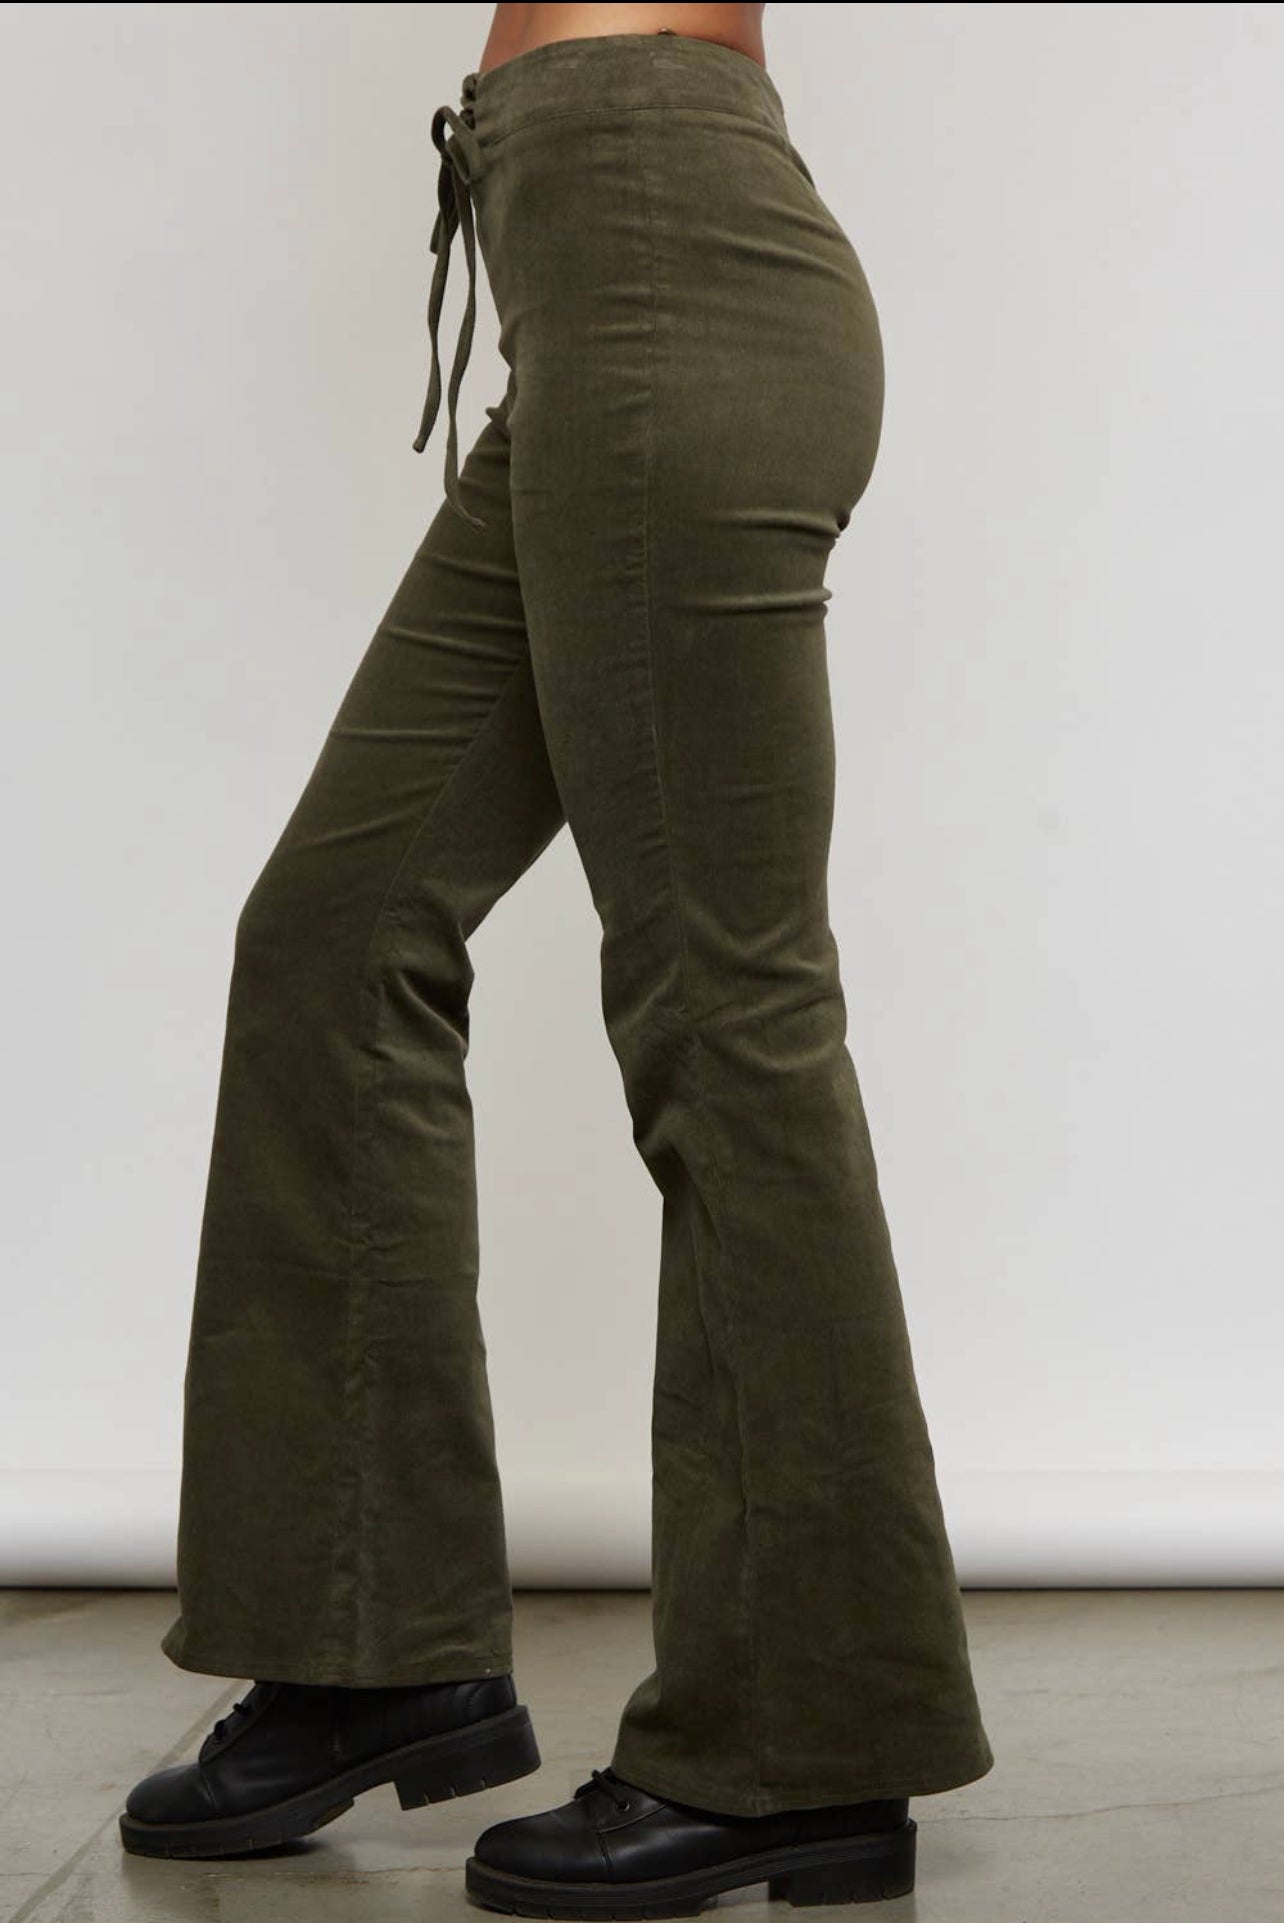 Indie Waist Lace Corduroy Flare Pant (Olive Green)